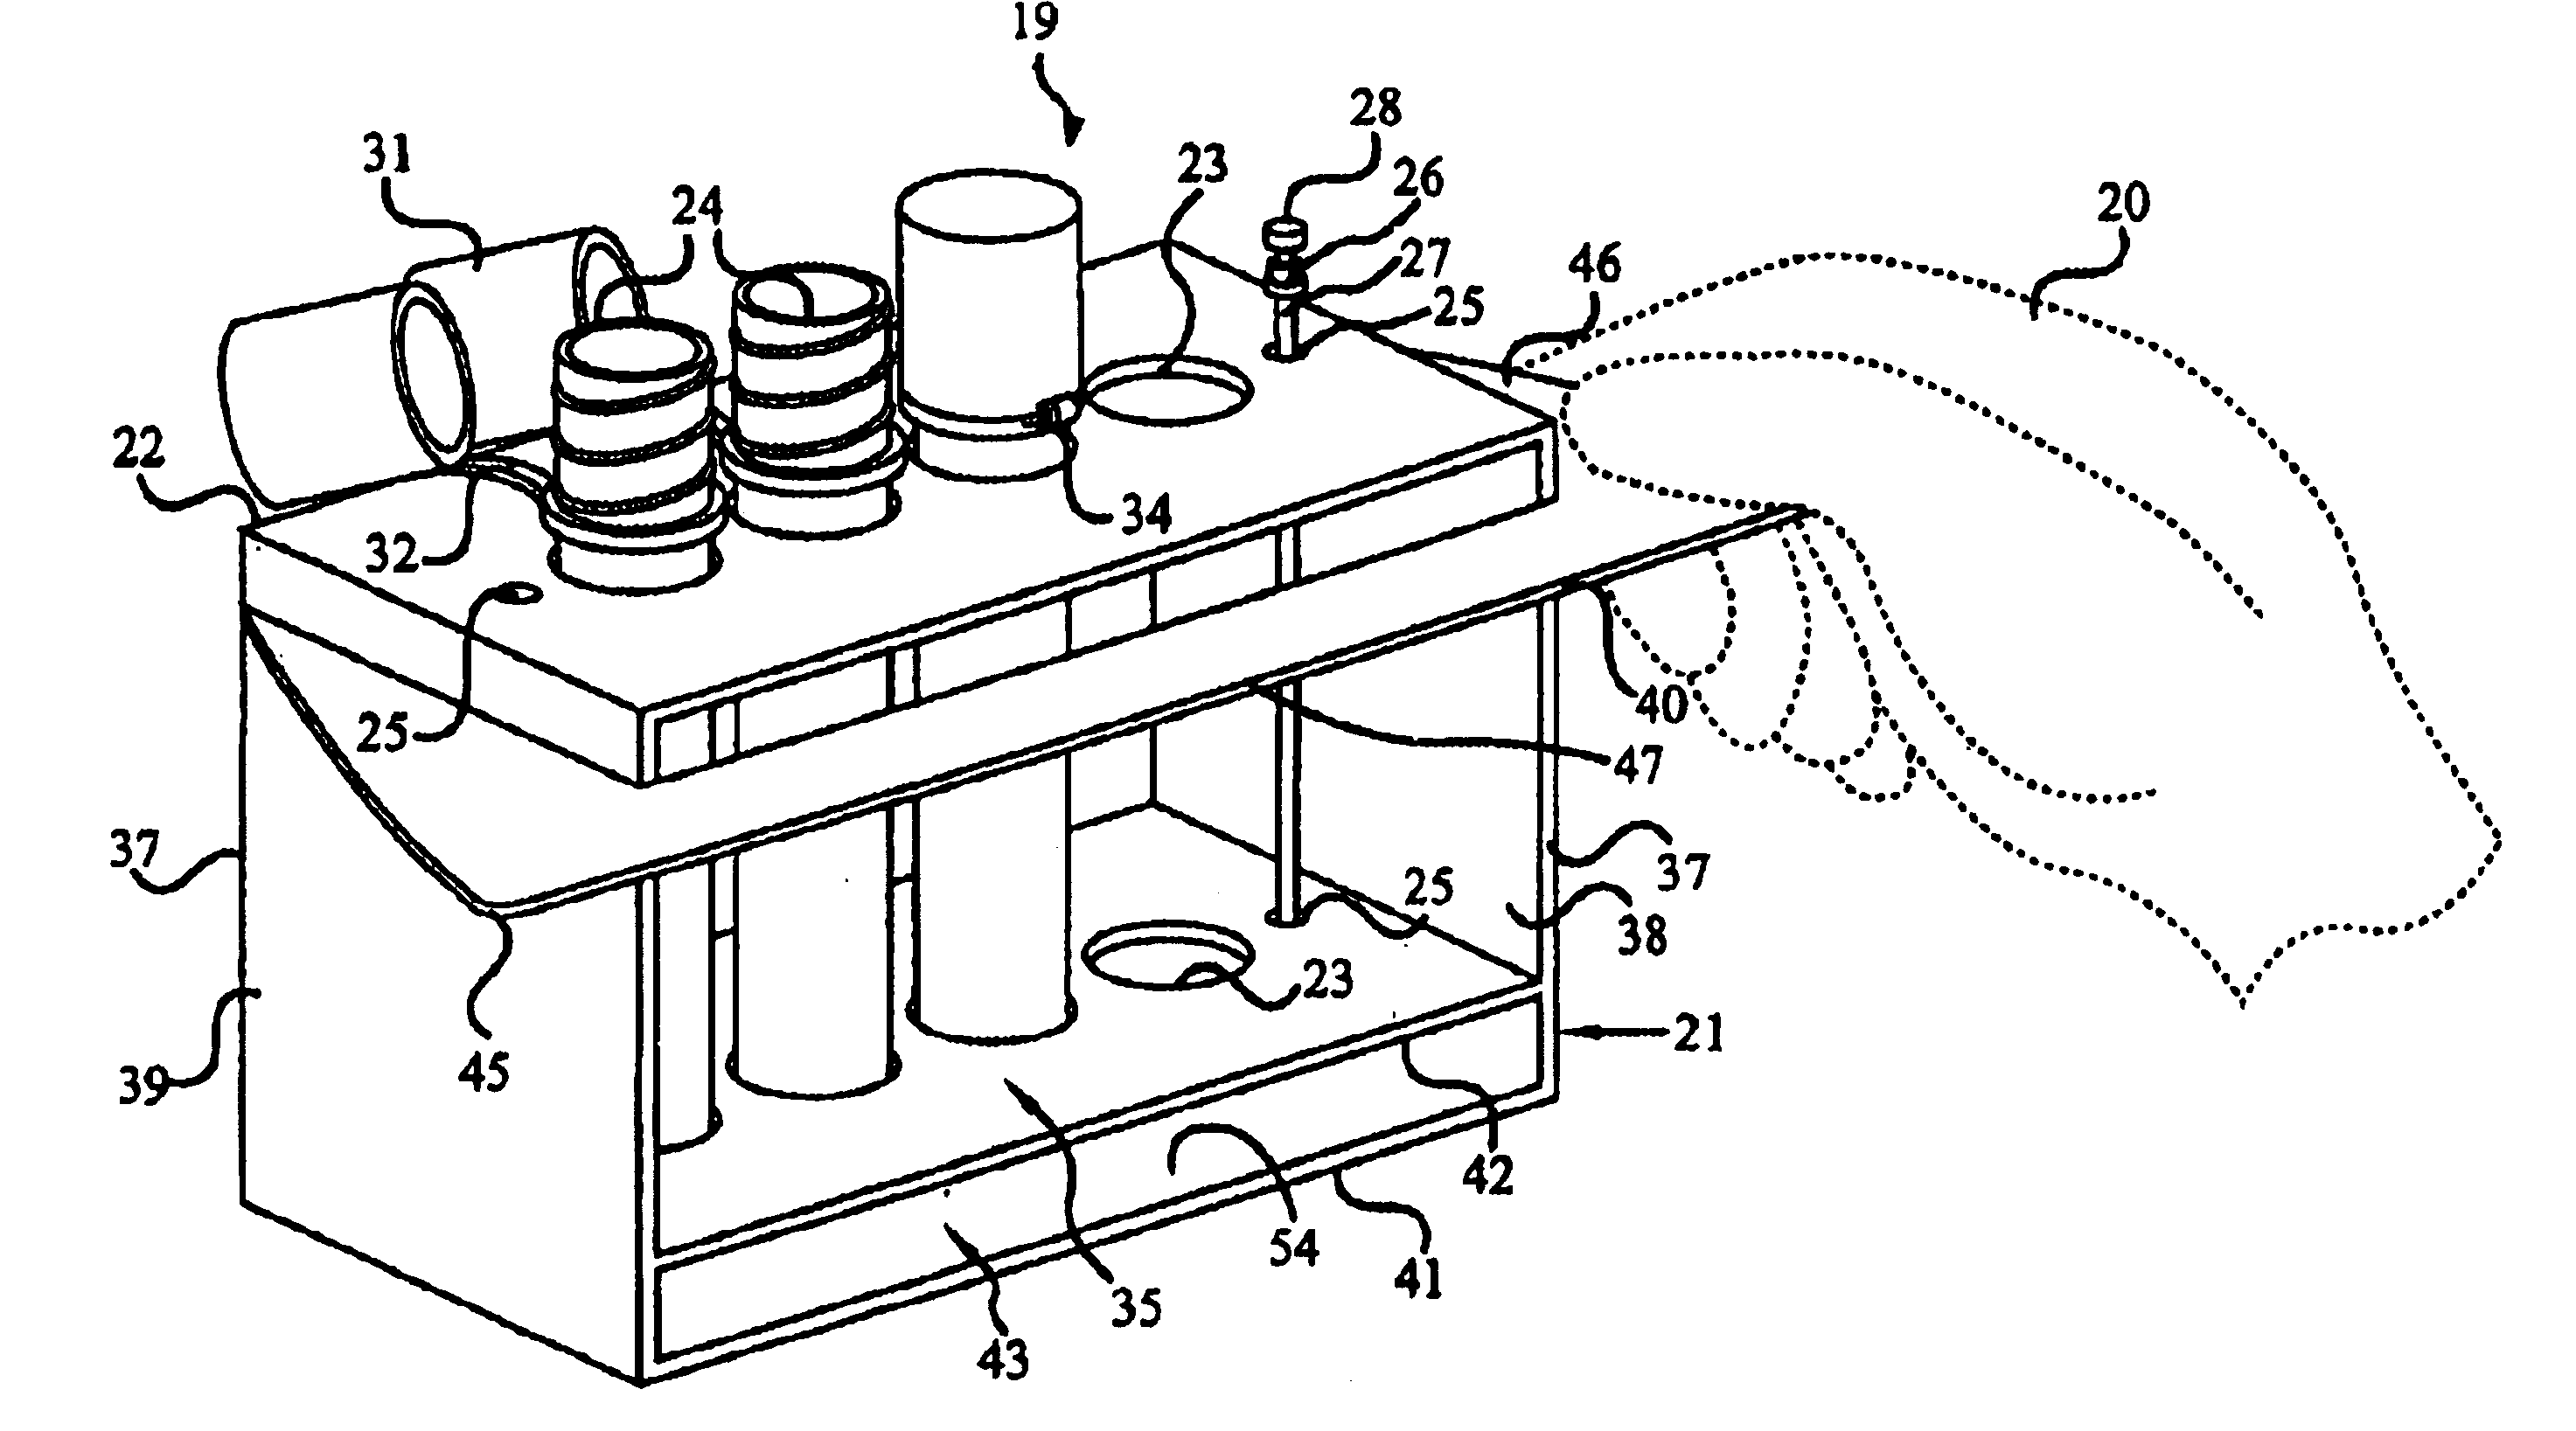 Spinal fluid collection system